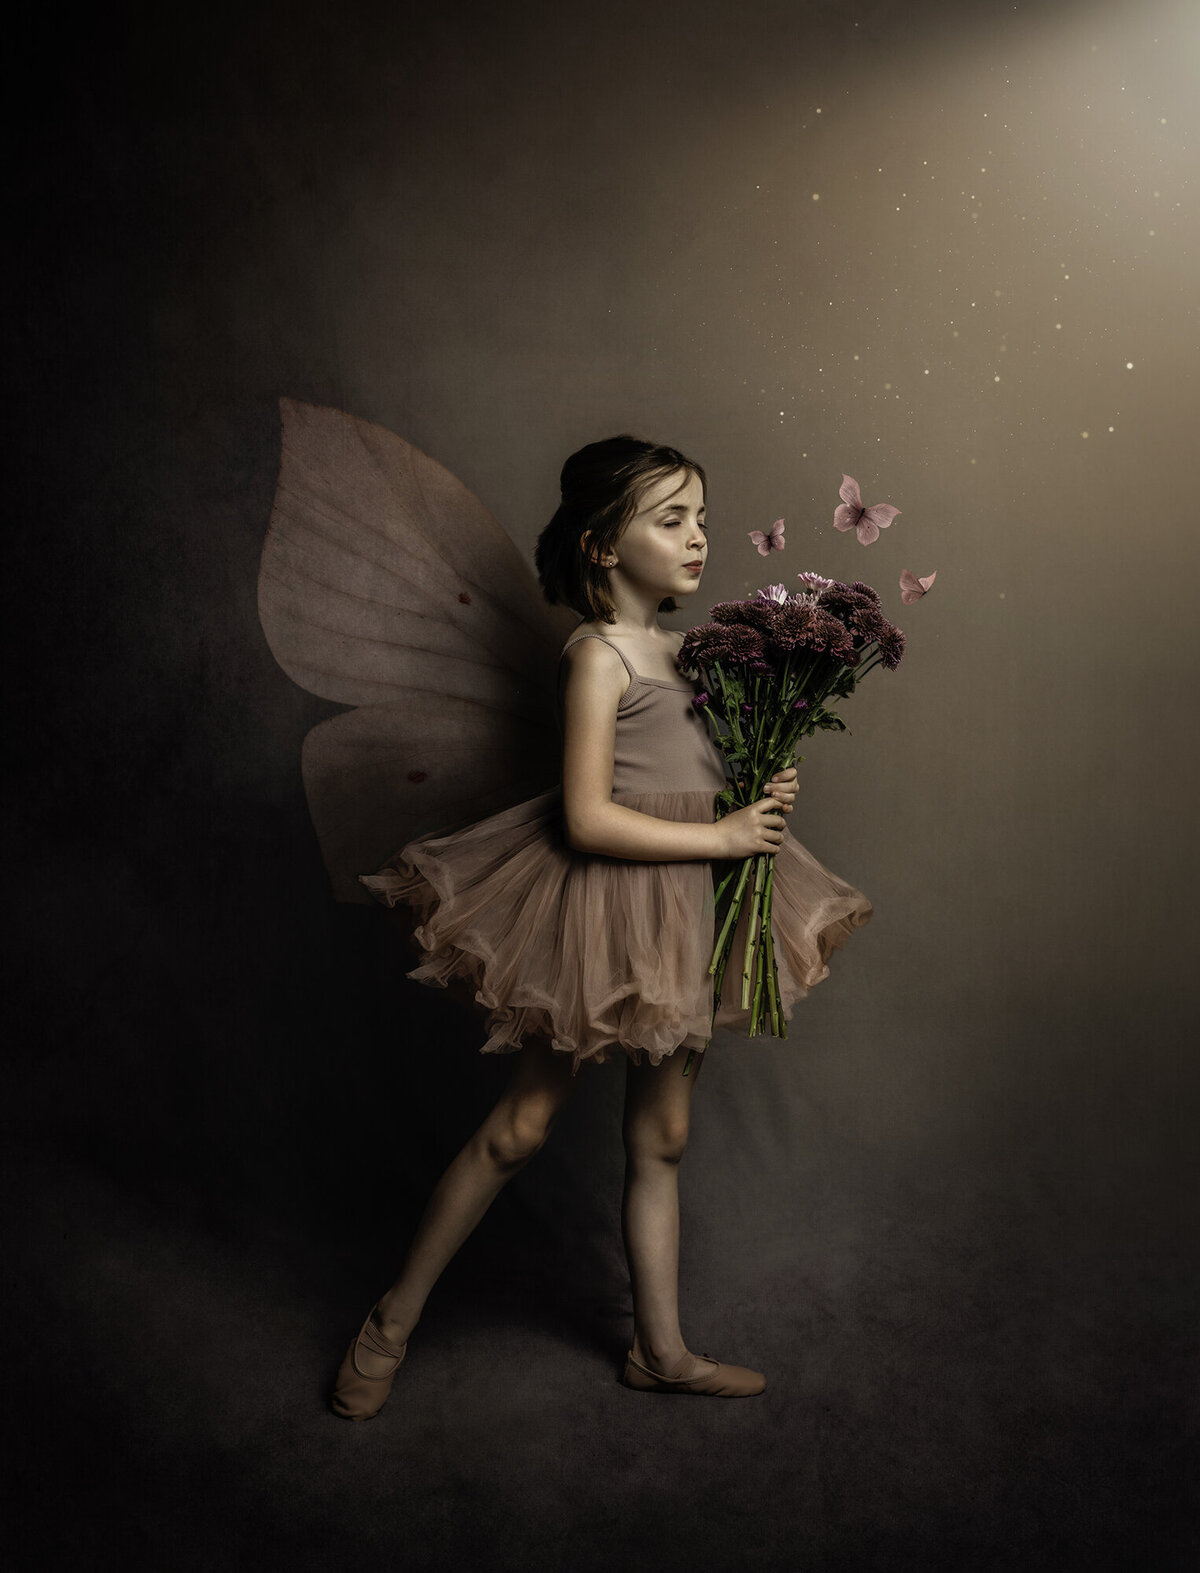 A little girl dressed as a fairy and holding flowers while butterflies fly around